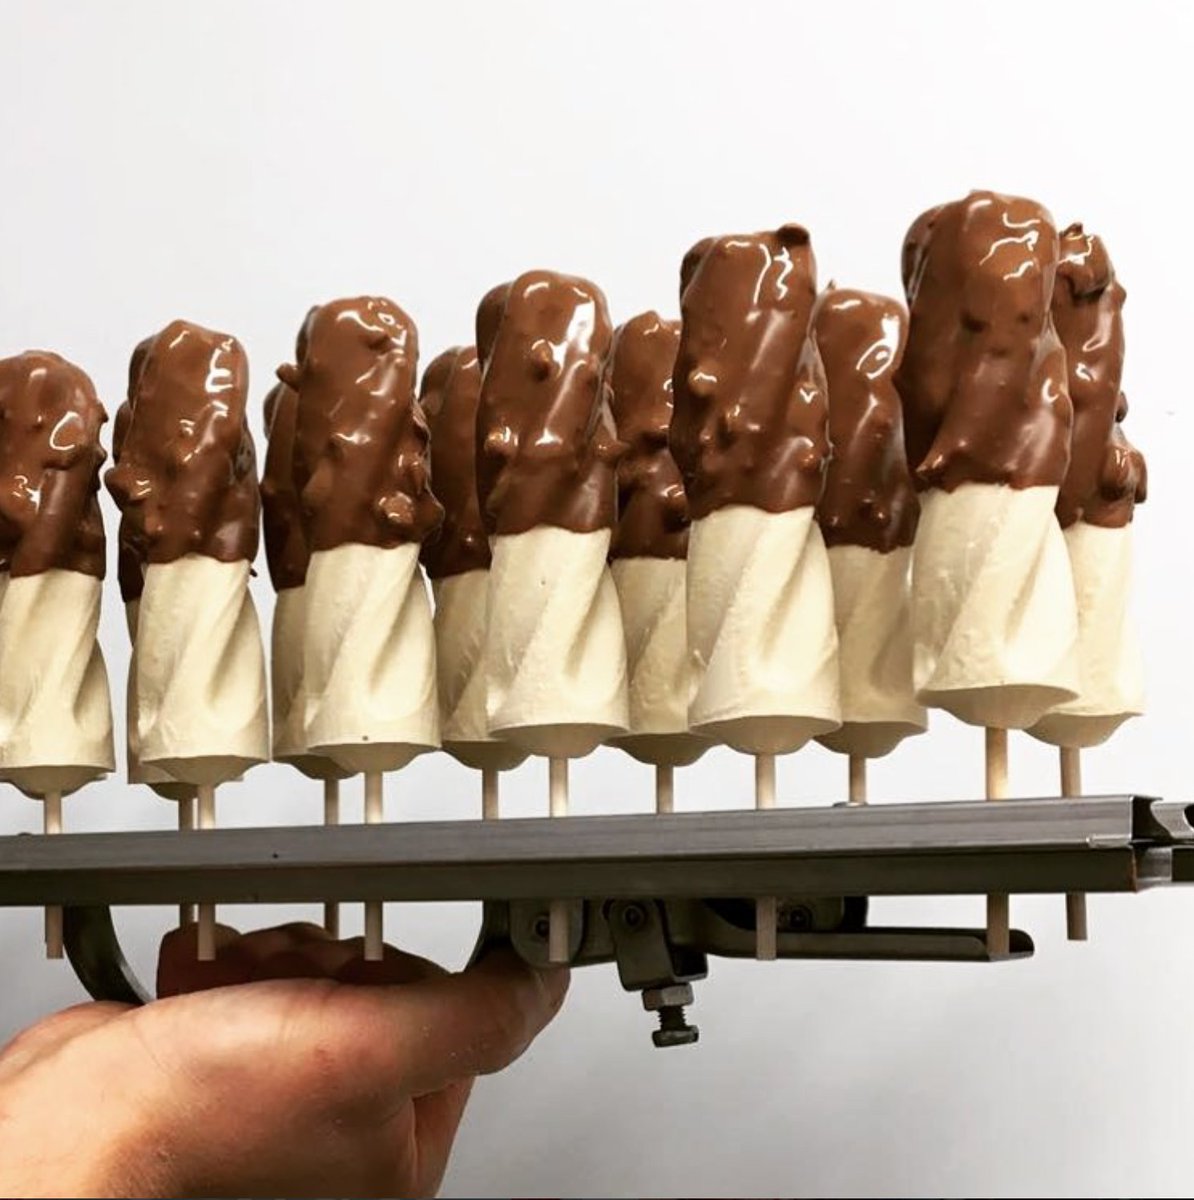 Our new Chocolate dipped Stout on a stick #icelollies using @shuckbrewery Oatmeal Stout are heading to @AldeburghFood Festival this weekend.